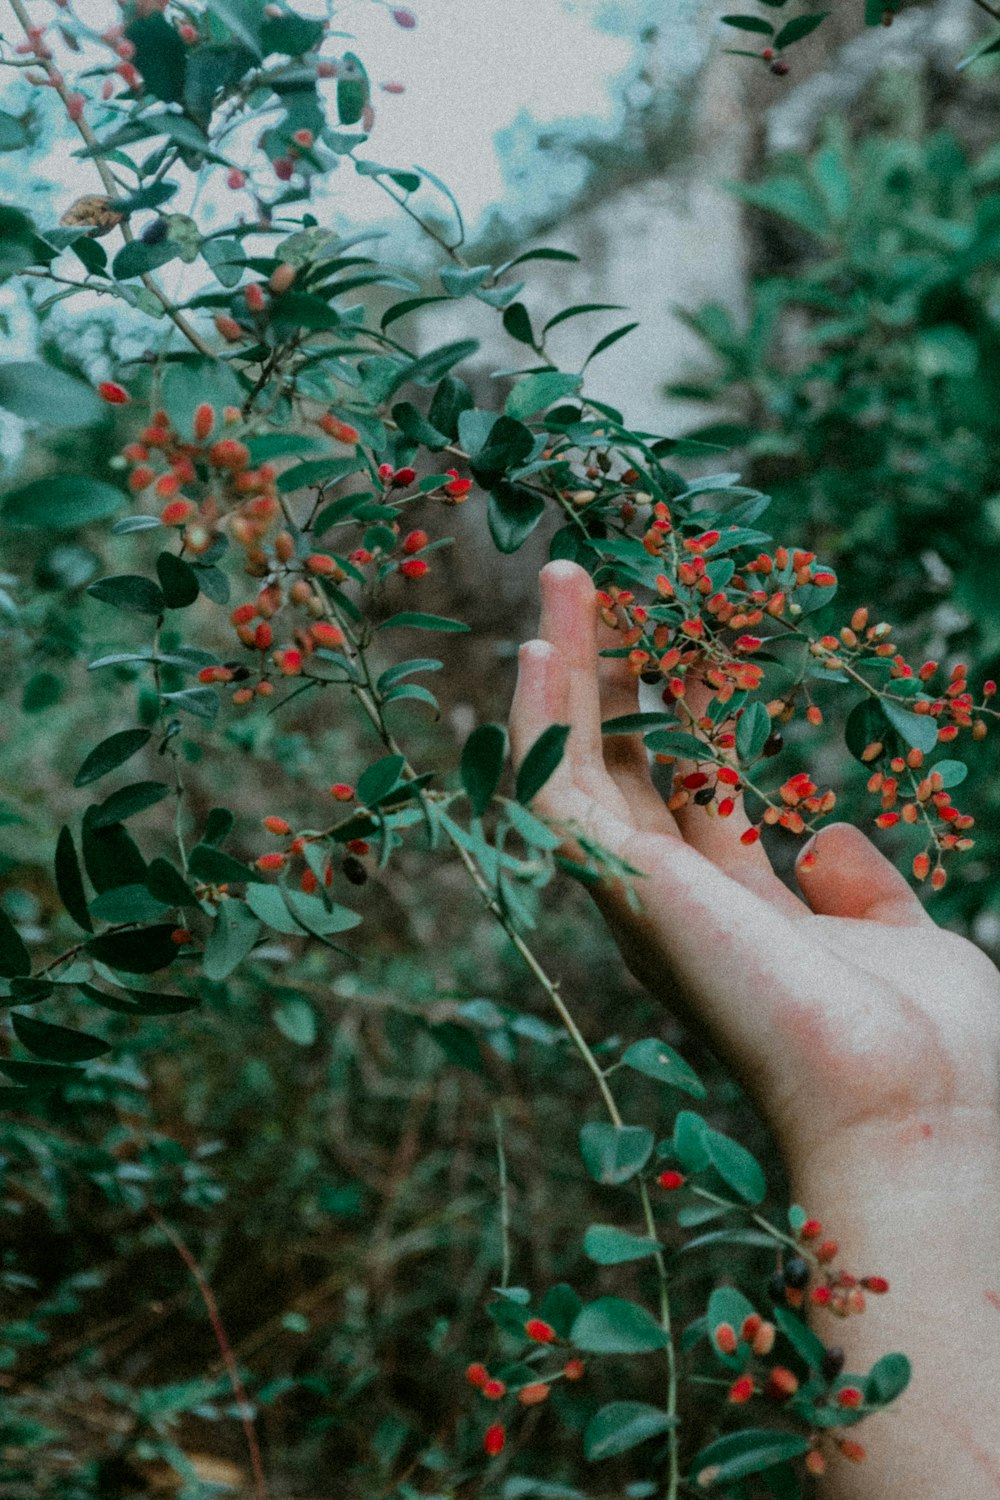 a hand reaching for berries on a tree